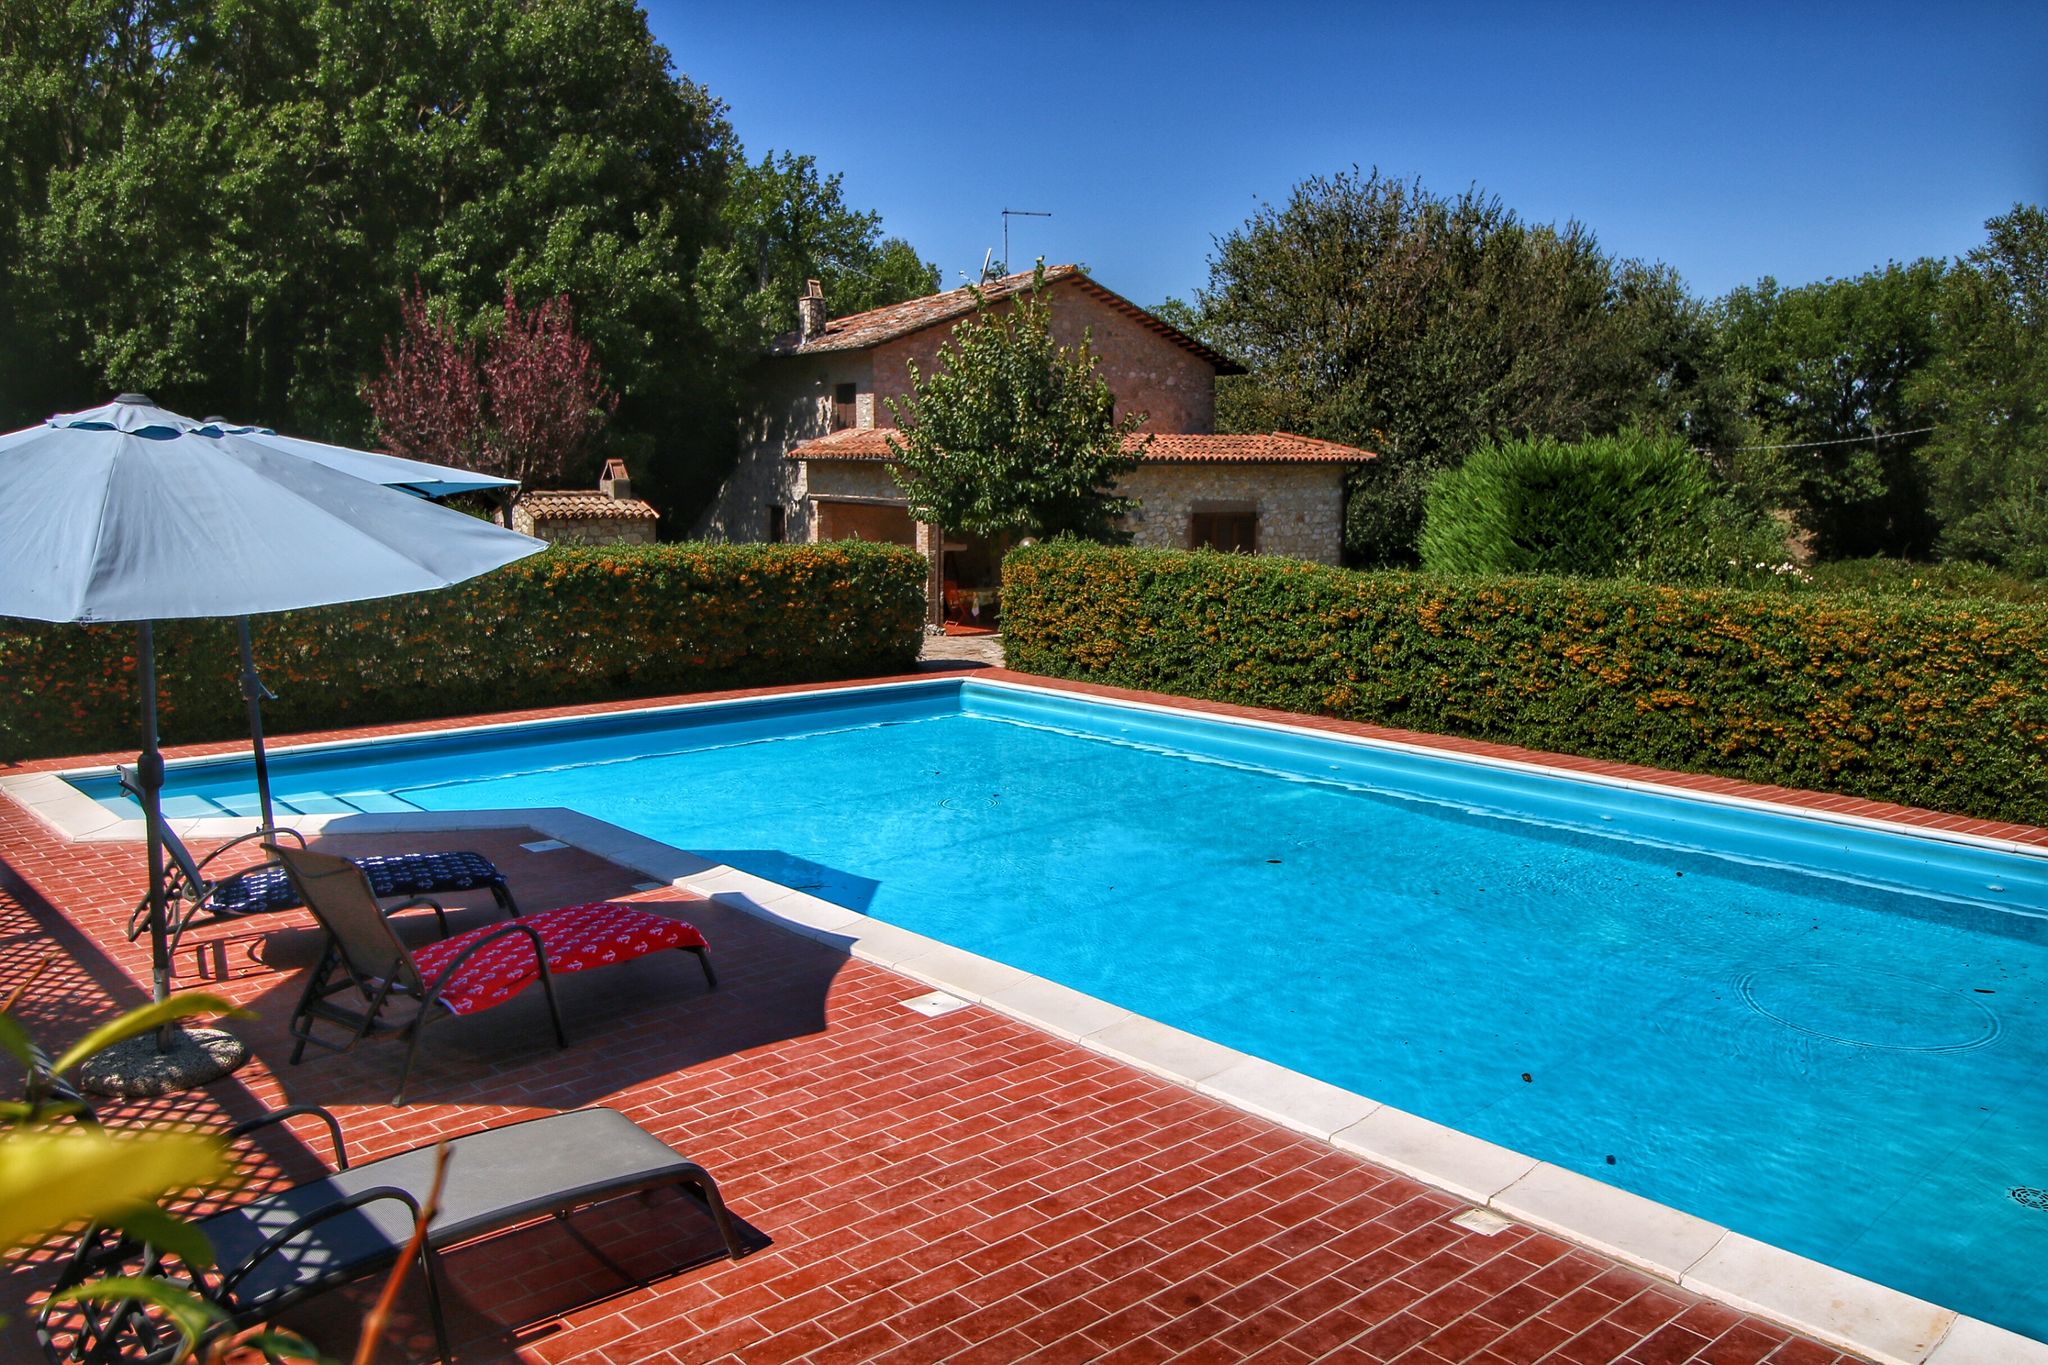 Villa with private pool in the hills, beautiful views and wonderful nature